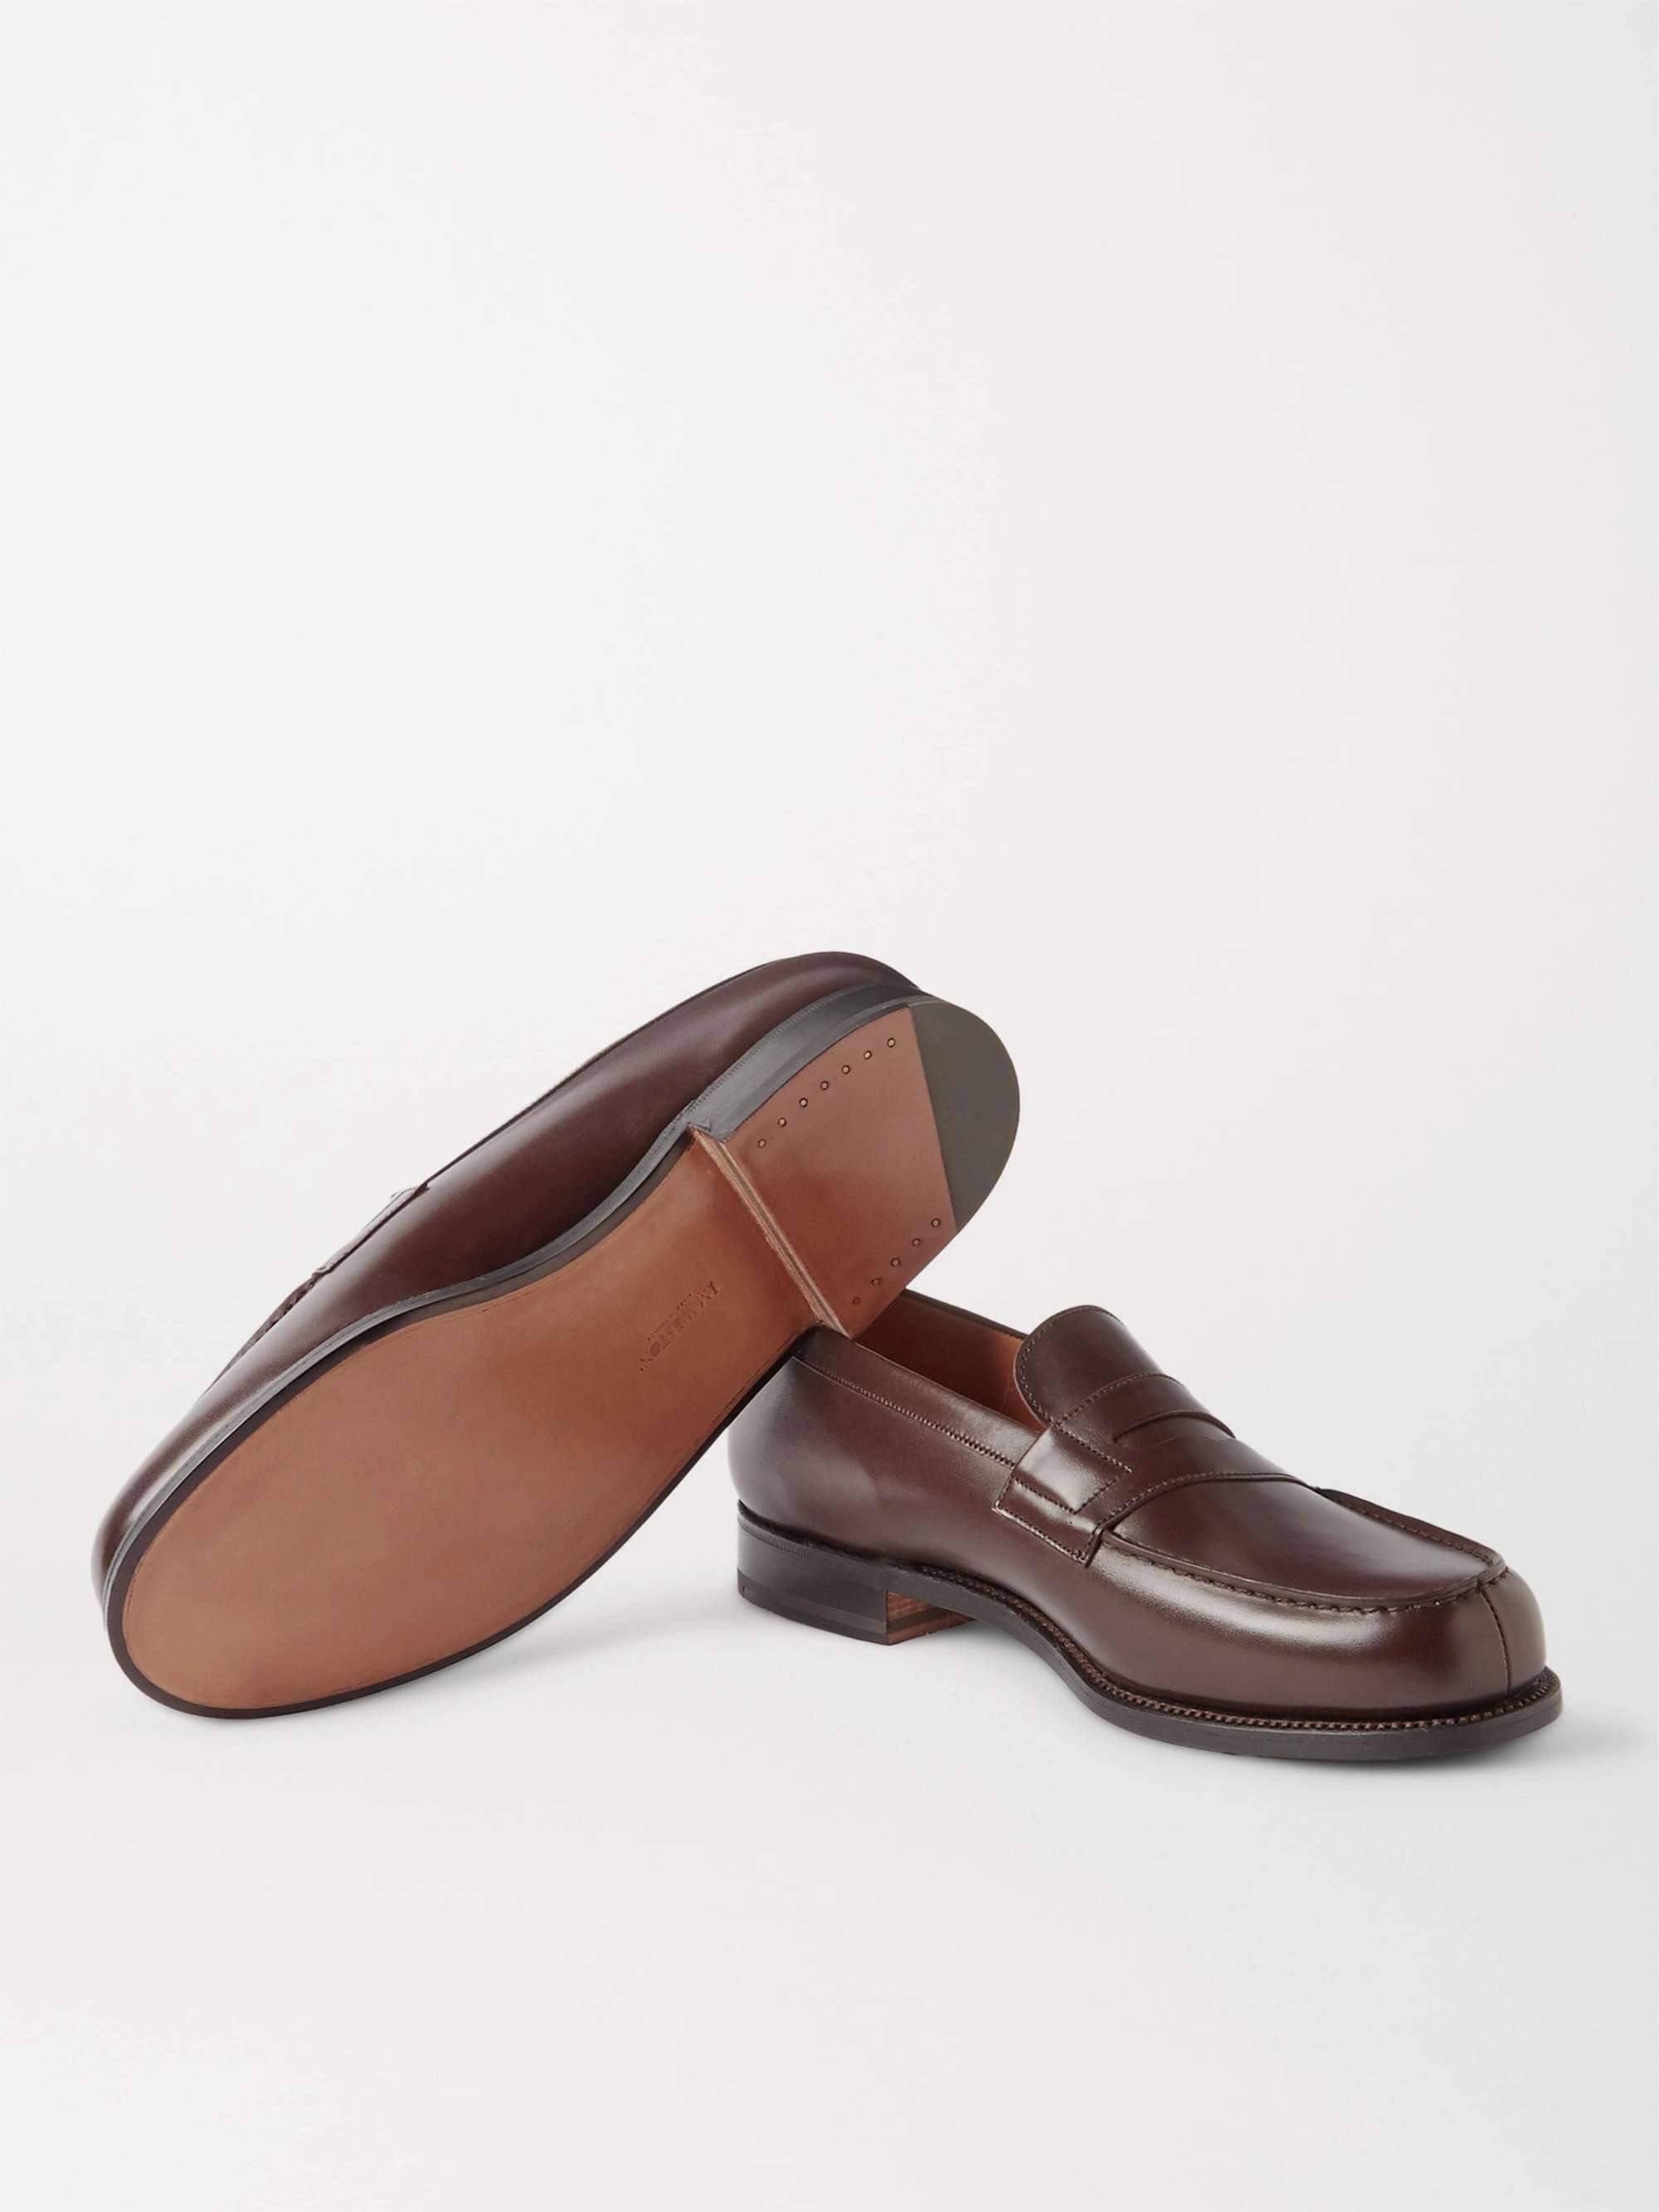 J.M. WESTON 180 Moccasin Leather Loafers